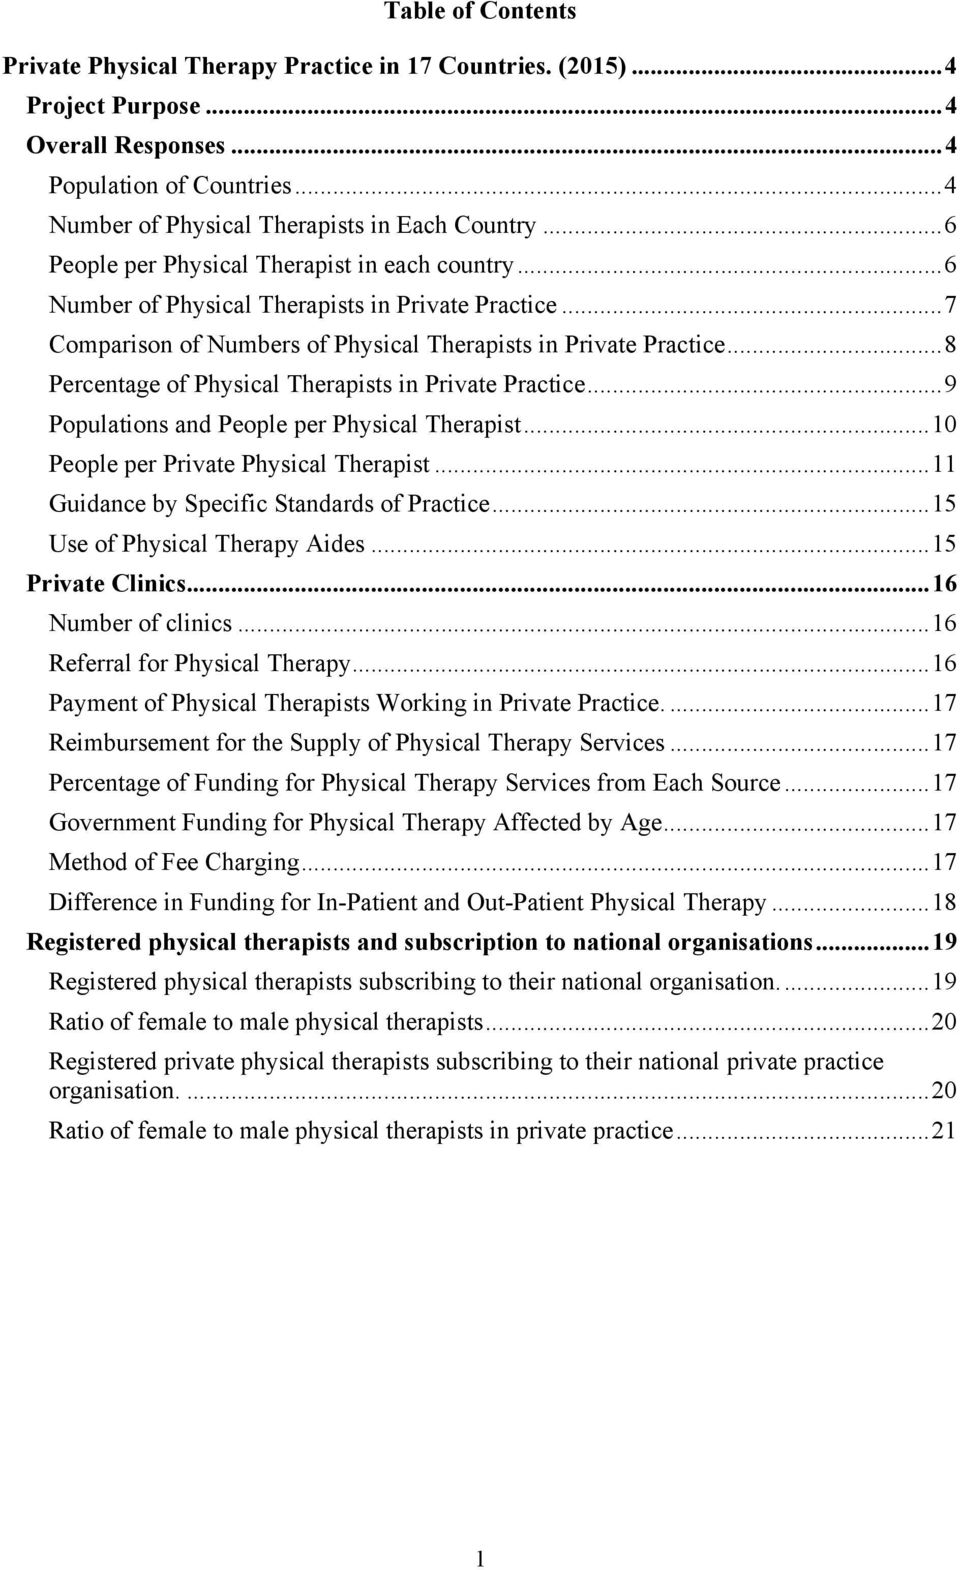 .. 8 Percentage of Physical Therapists in Private Practice... 9 Populations and People per Physical Therapist... 1 People per Private Physical Therapist... 11 Guidance by Specific Standards of Practice.